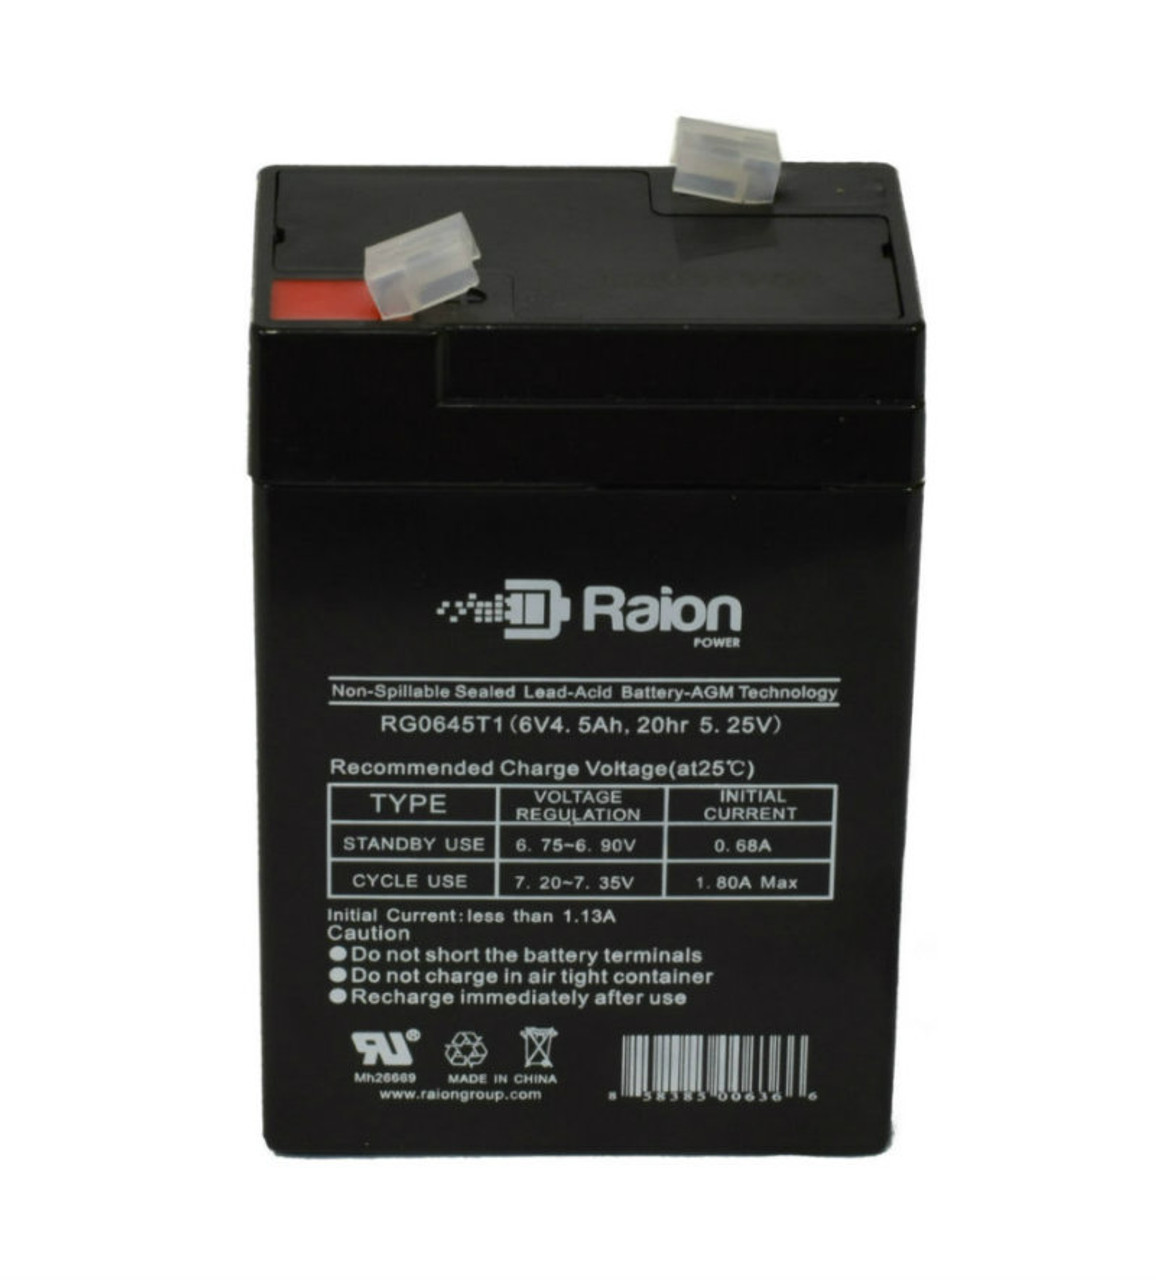 Raion Power RG0645T1 Replacement Battery Cartridge for Big Beam 2CL6S5